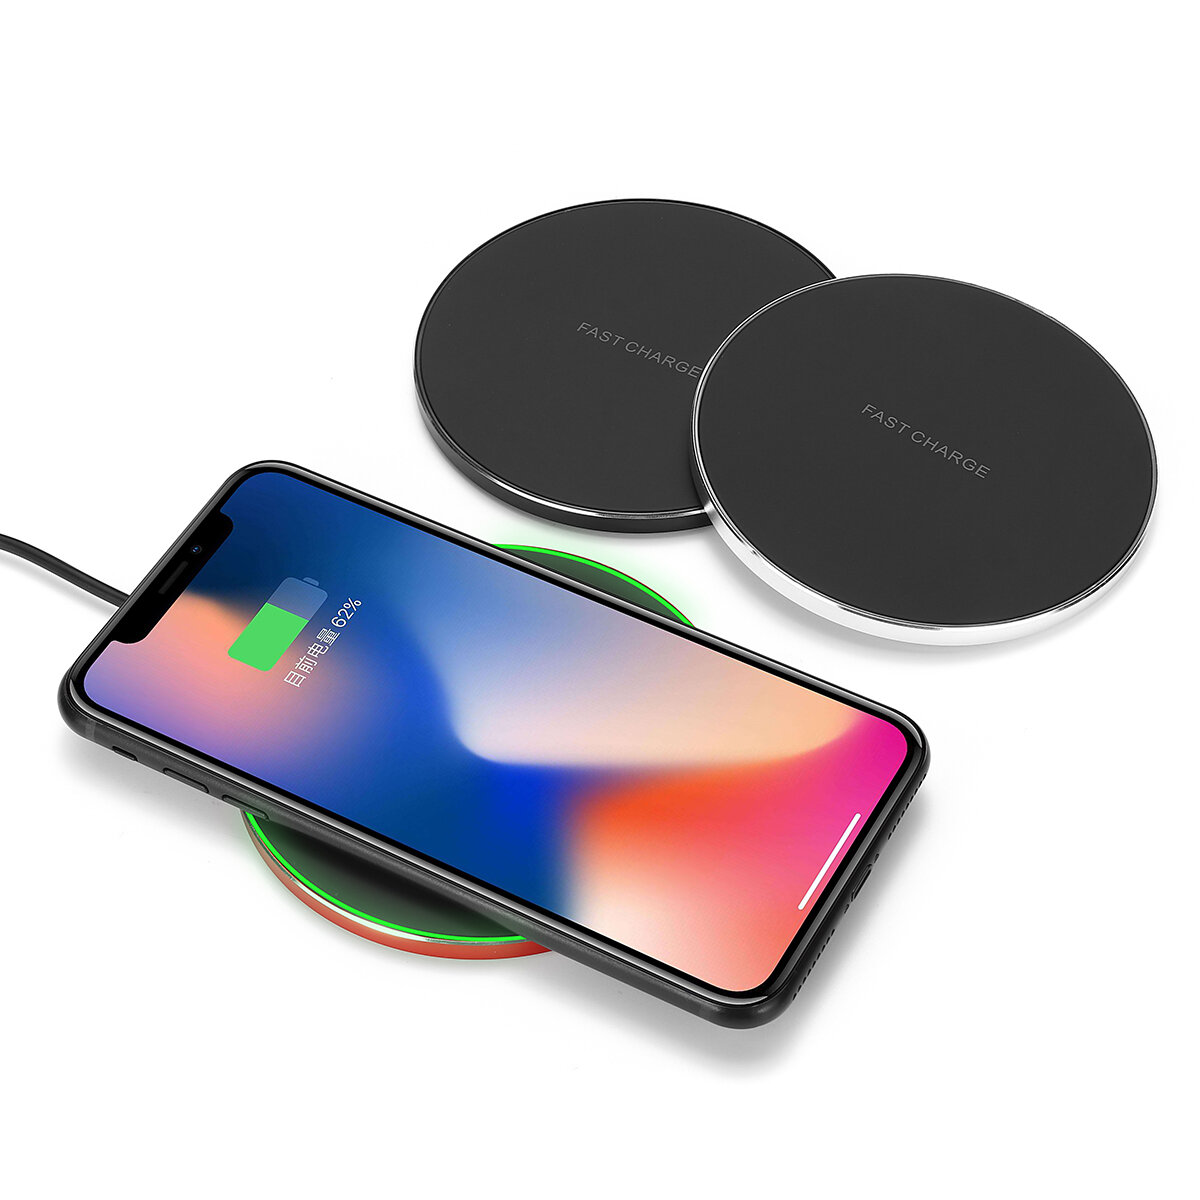 Bakeey Aluminum QI Wireless Fast Charger Charging Dock Pad Mat Phone For iPhone XS XR X